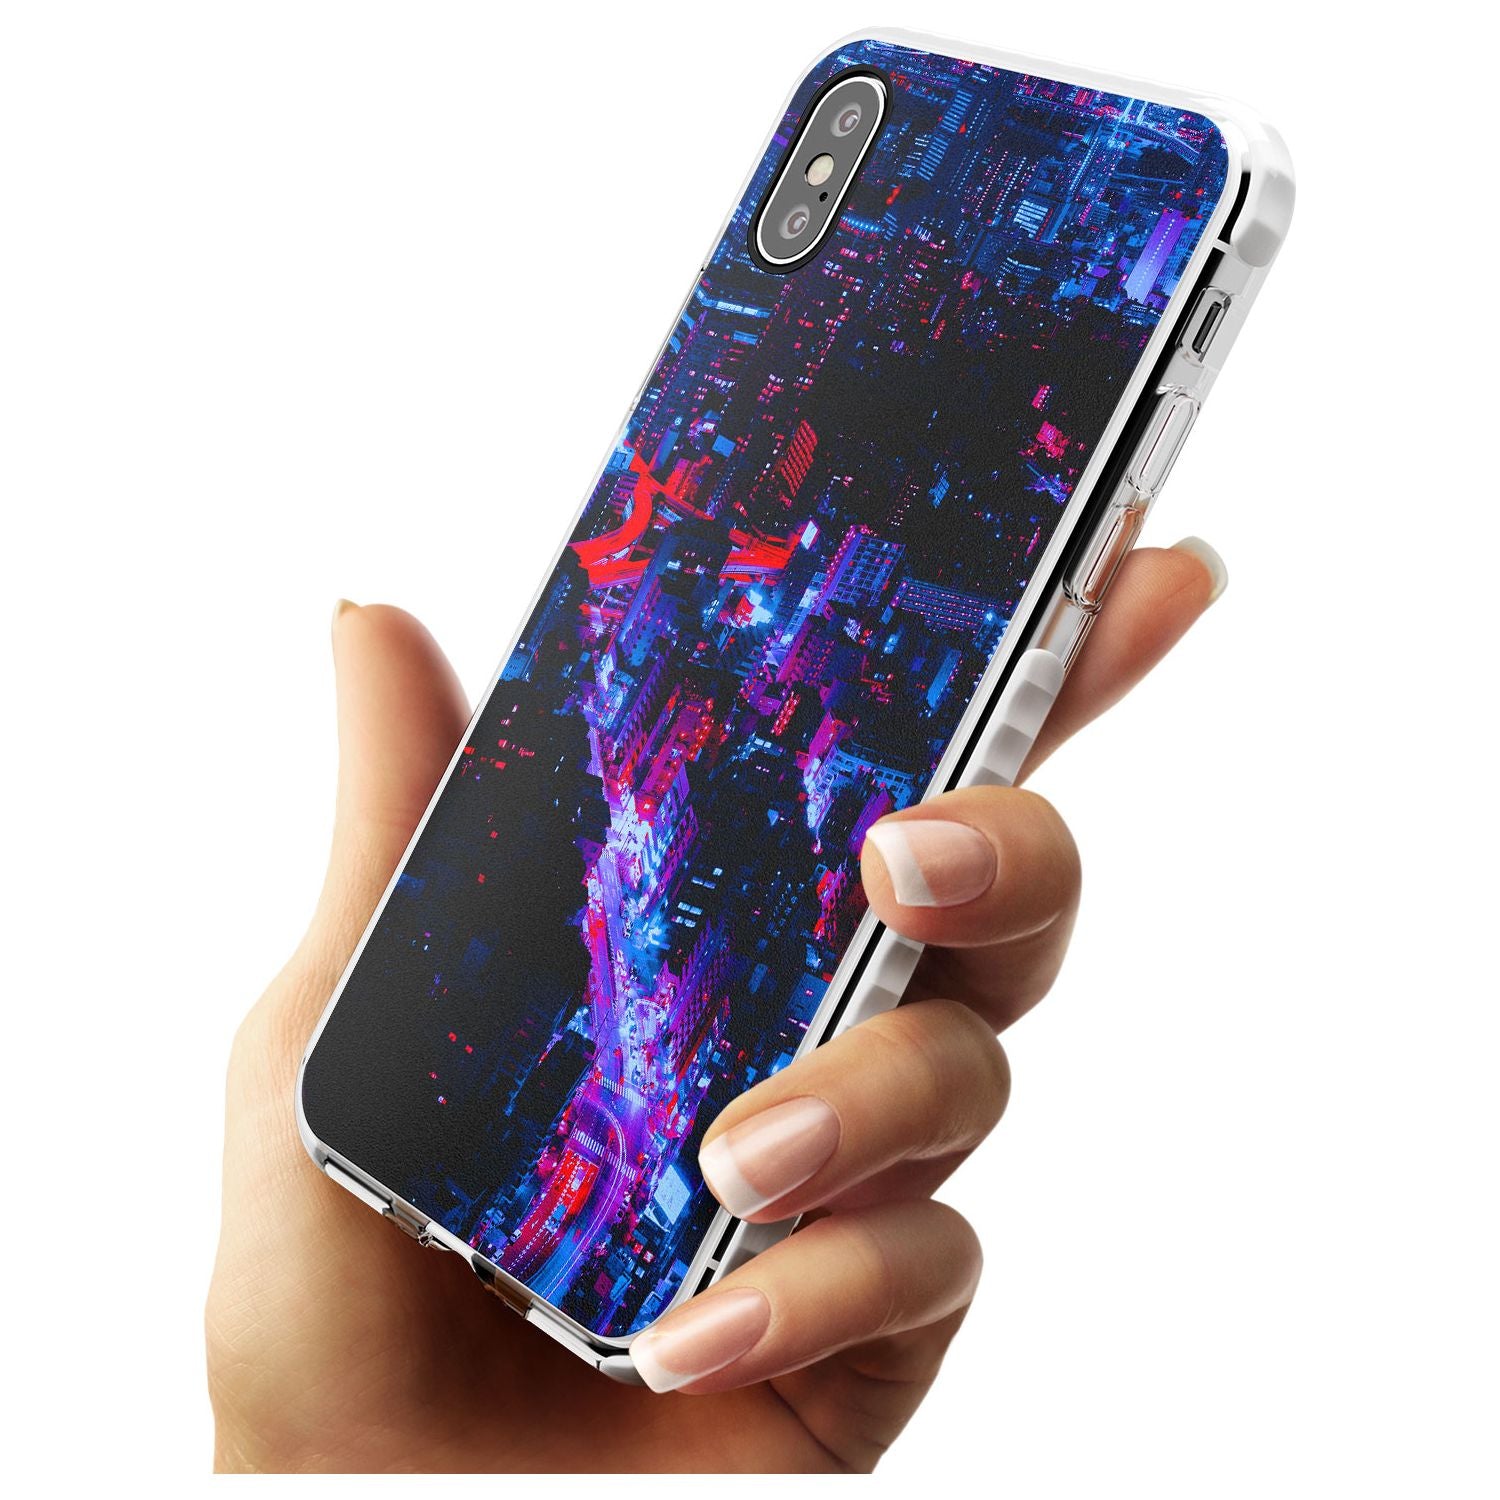 Arial City View - Neon Cities Photographs Impact Phone Case for iPhone X XS Max XR